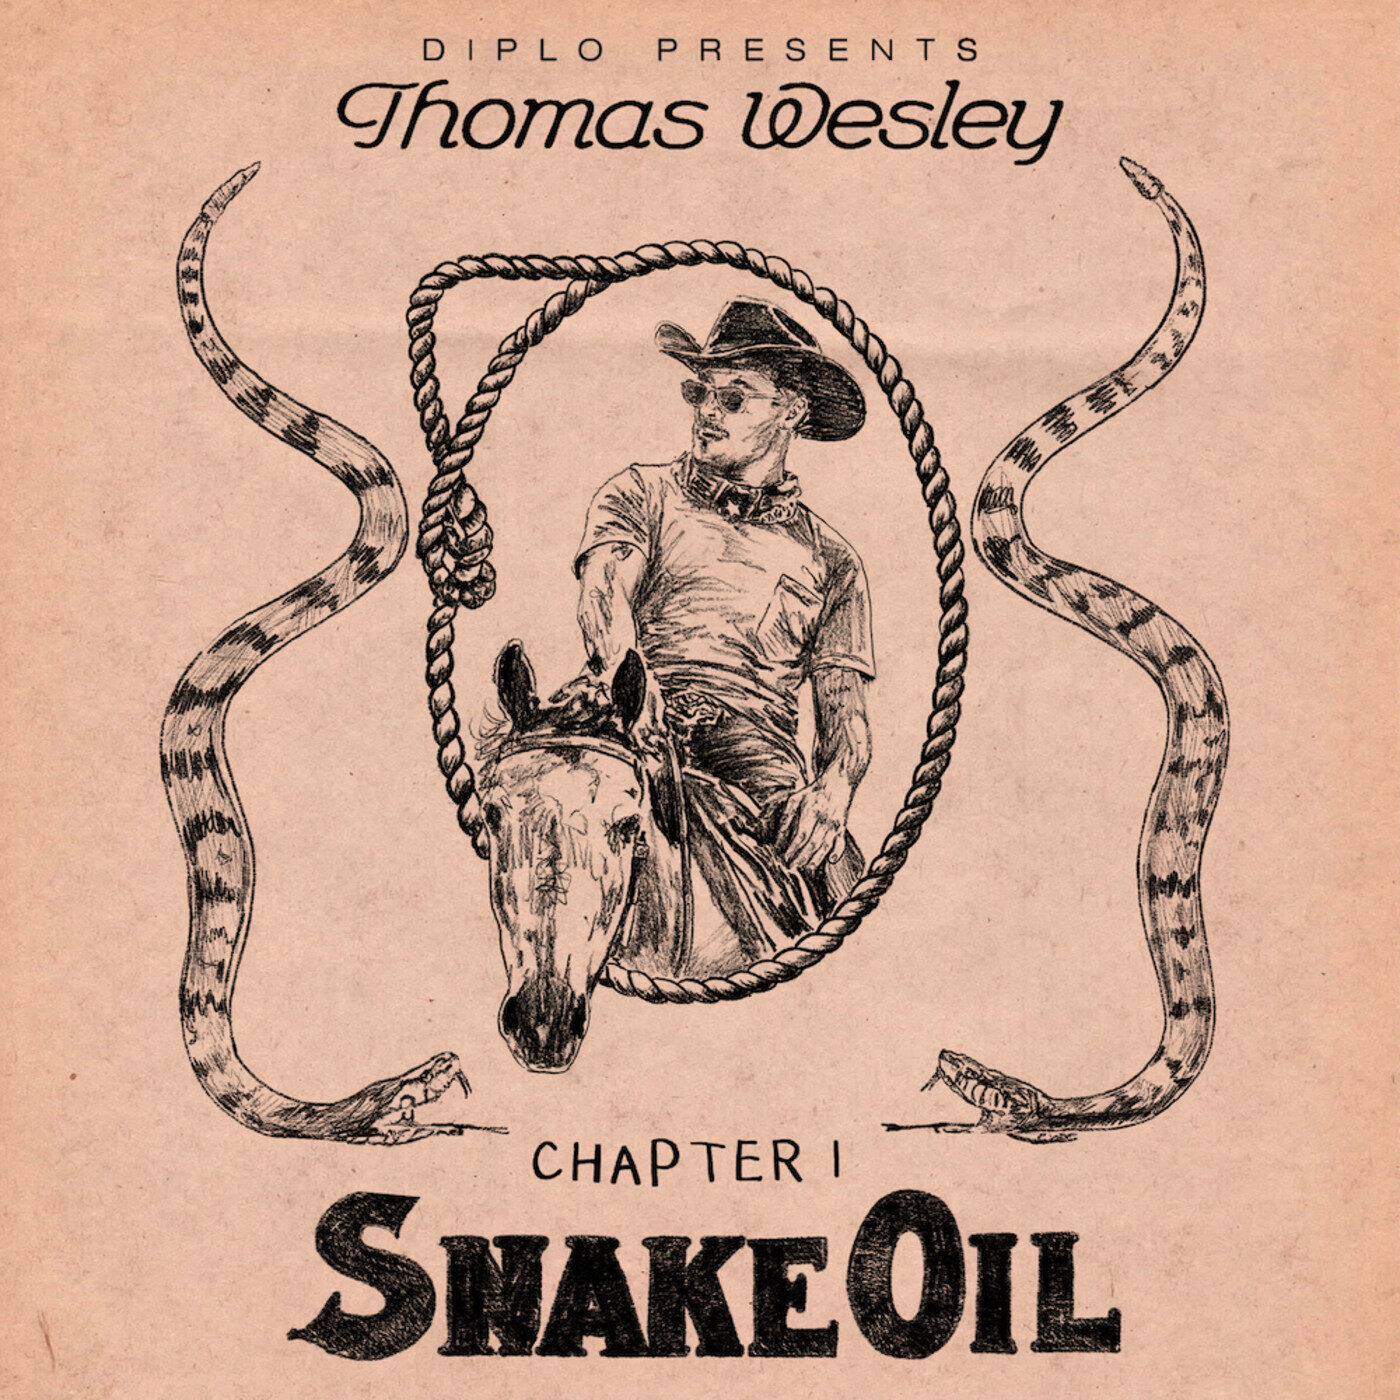 diplo-presents-thomas-wesley-chapter-1-snake-oil-stream-3005712